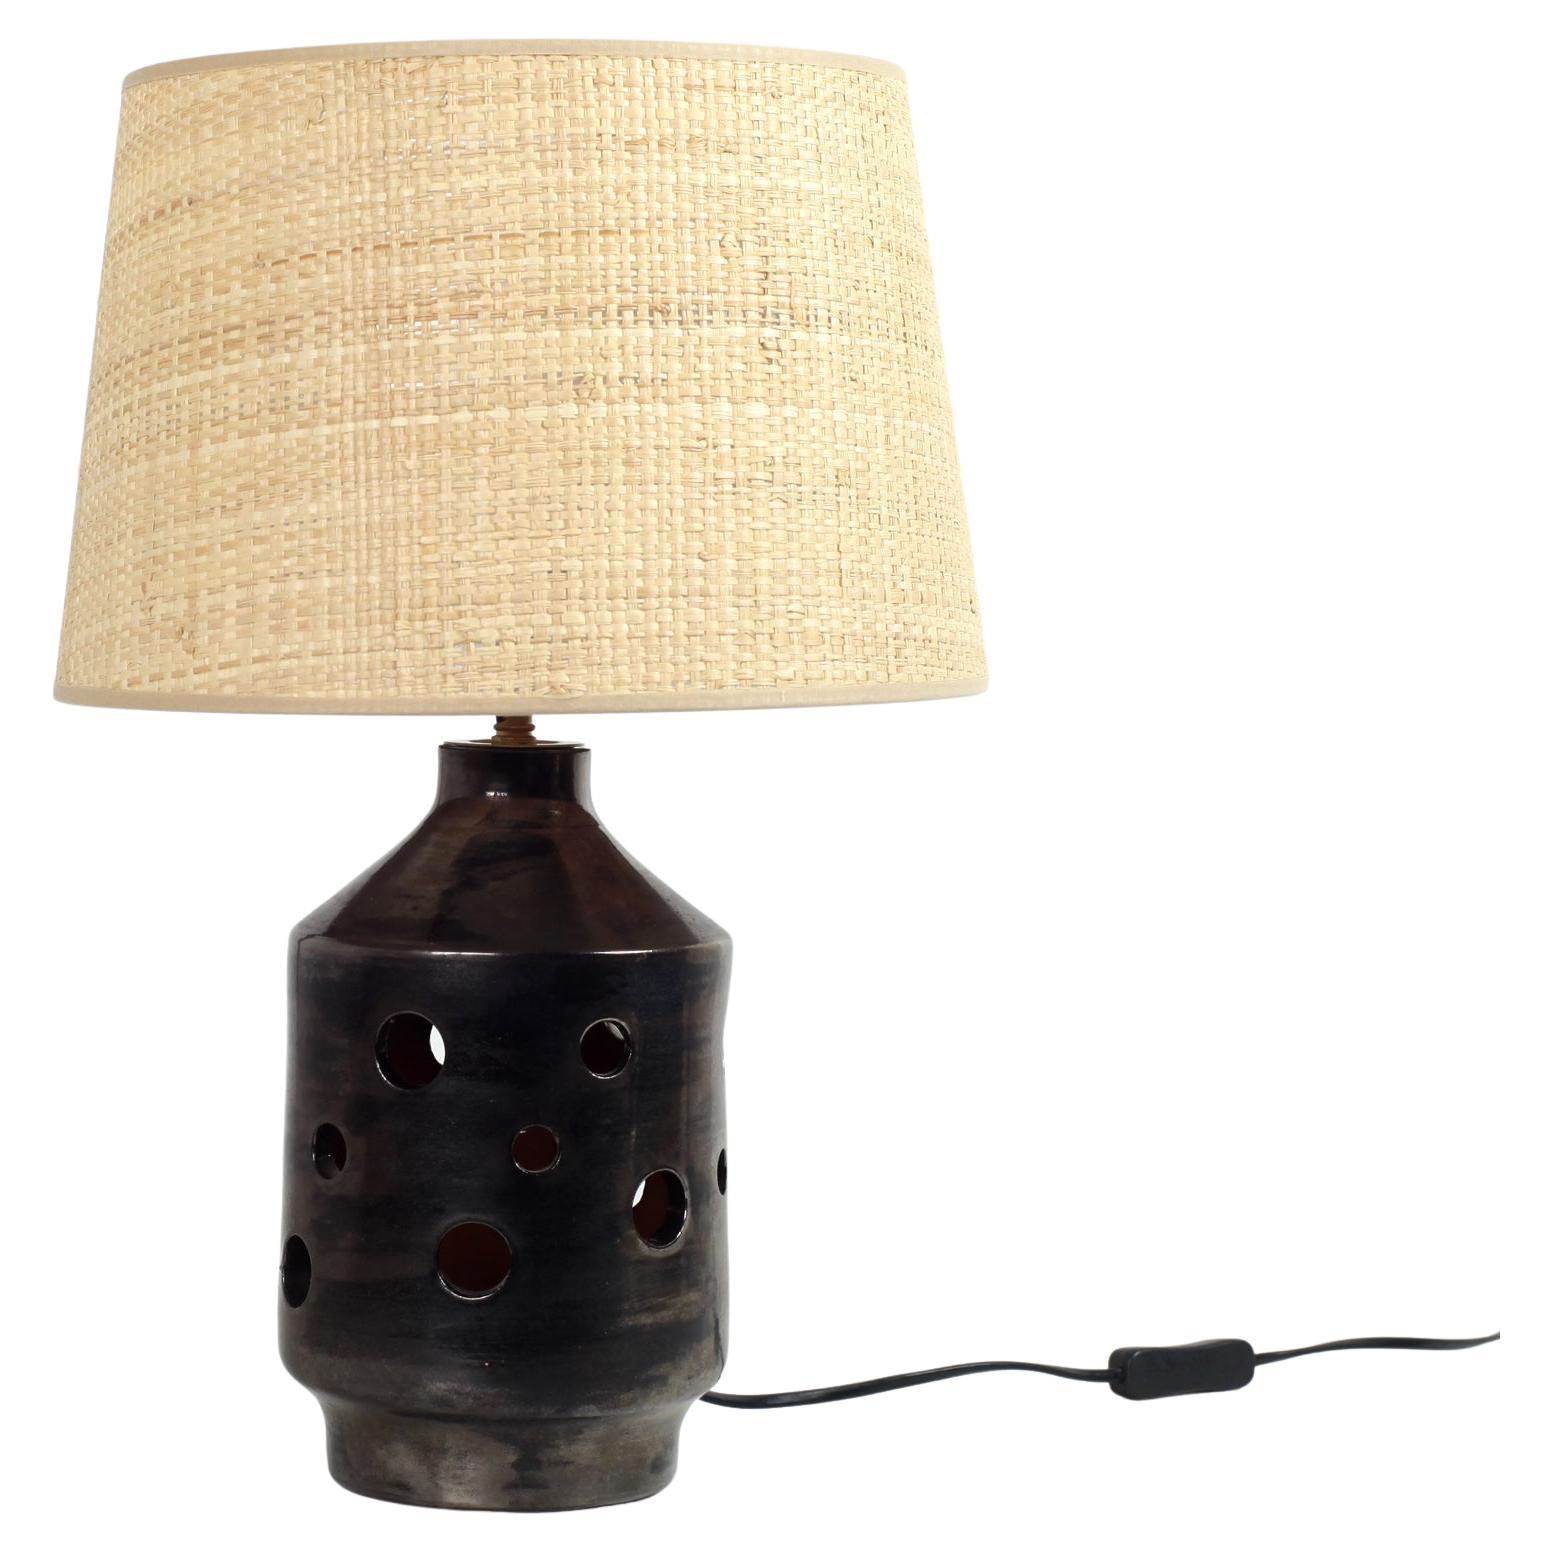 Two lights ceramic table lamp by Albert Spinelli, 1970, France
Albert Spinelli was a 20th century French sculptor, he was also the grandson of French President Georges Clémenceau
Signed
Silver black glazed
Lamp height (base to top socket) 33